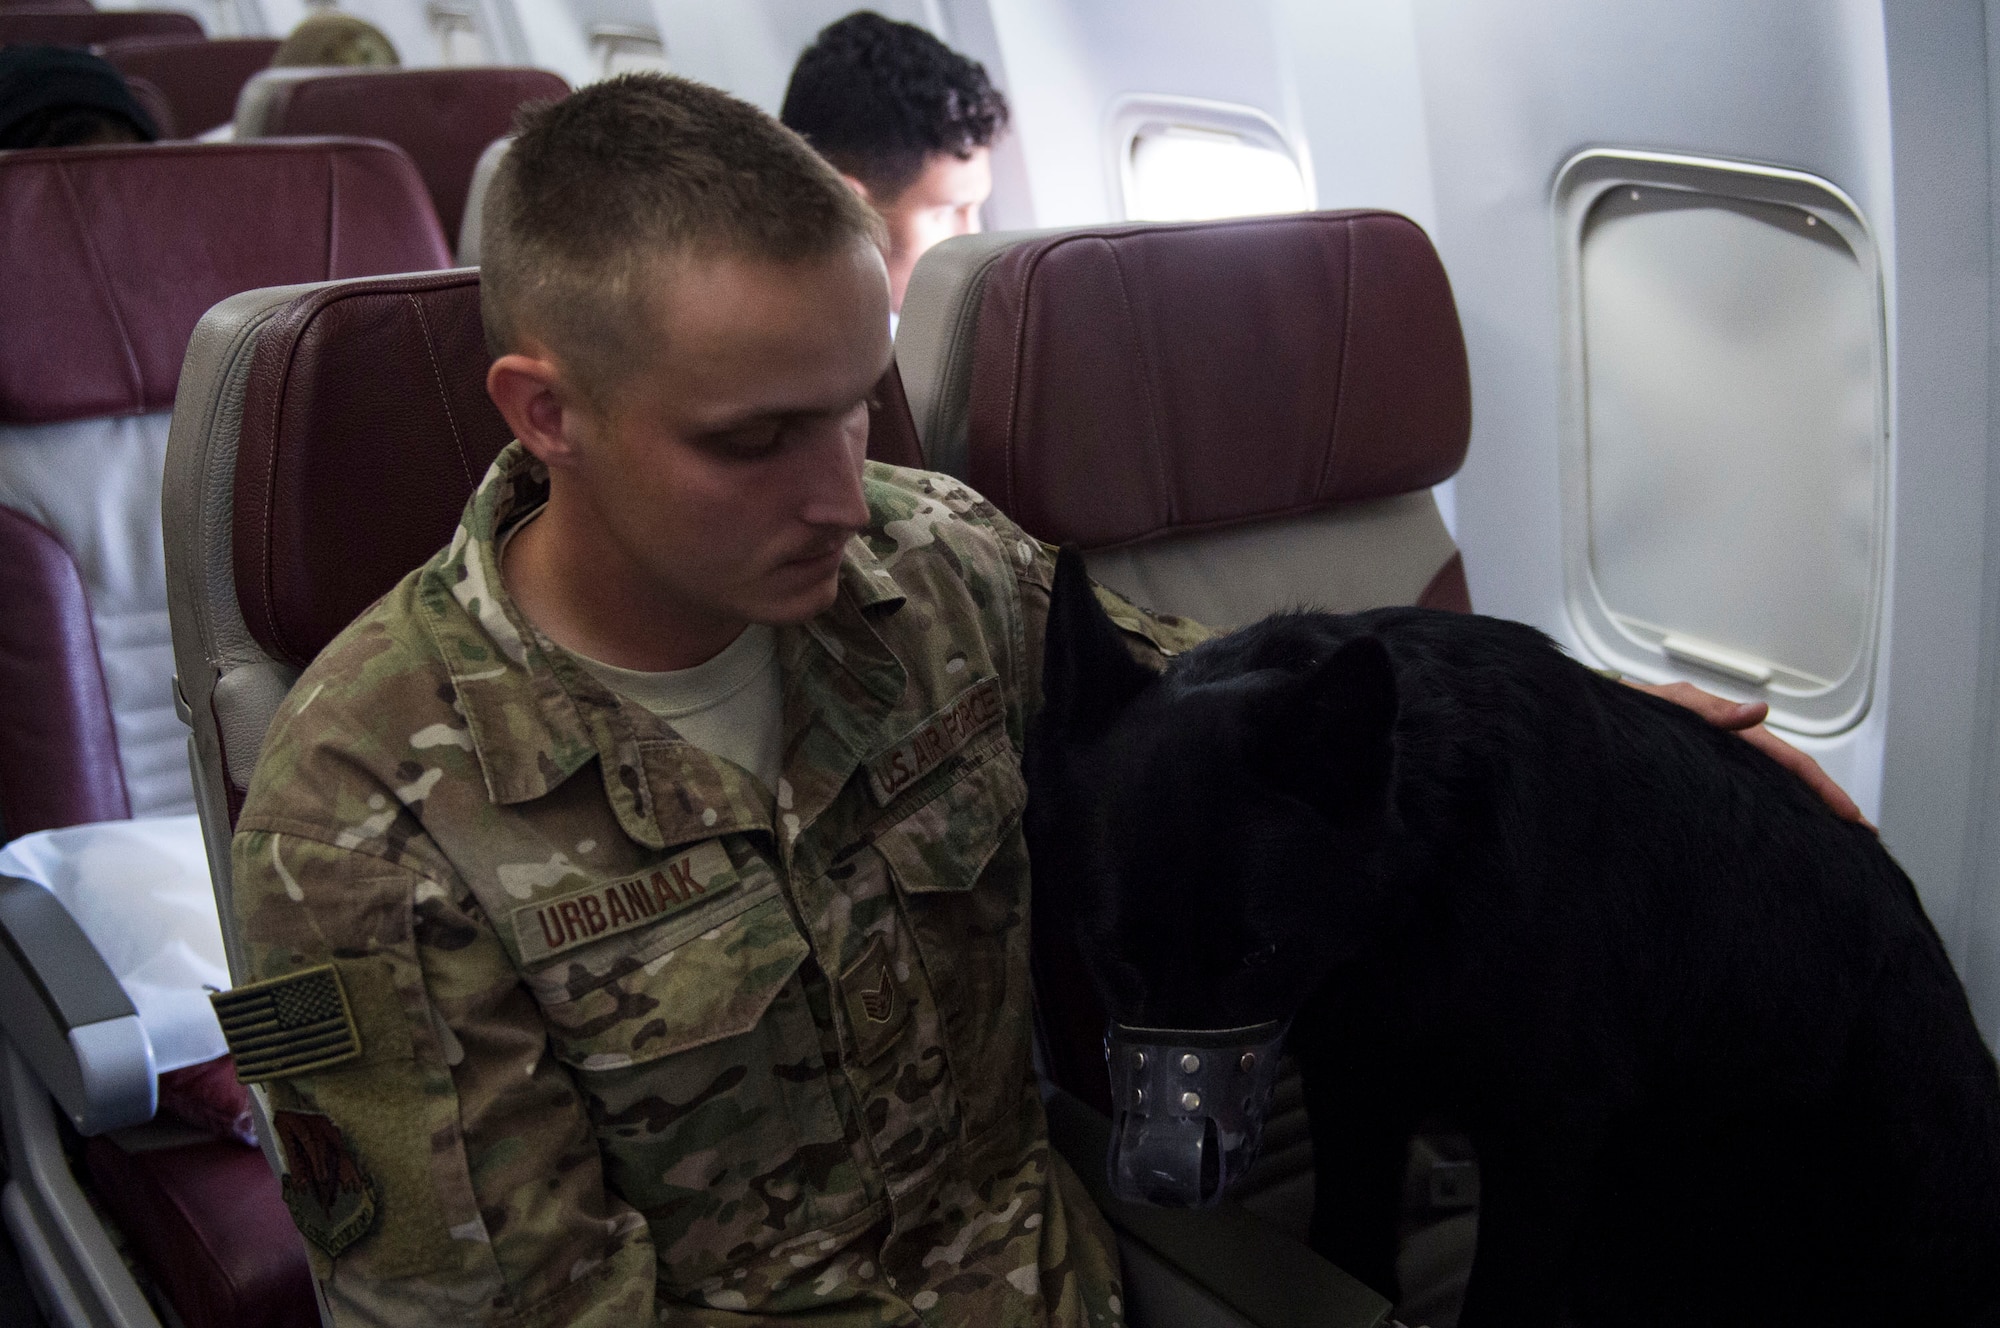 Staff Sgt. Jeffrey Urbaniak, 824th Base Defense Squadron (BDS) Military Working Dog (MWD) handler, and MWD ‘Buster’ claim their seats, 0ct. 24, 2018, at Moody Air Force Base, Ga. The 822d, 823d and 824th BDS’s provide high-risk force protection and integrated base defense for expeditionary air forces. Airmen from the 823d BDS just returned home from conducting relief-in-place in the United States Africa Command theater while Airmen from the 824th BDS took their place. (U.S. Air Force photo by Senior Airman Janiqua P. Robinson)